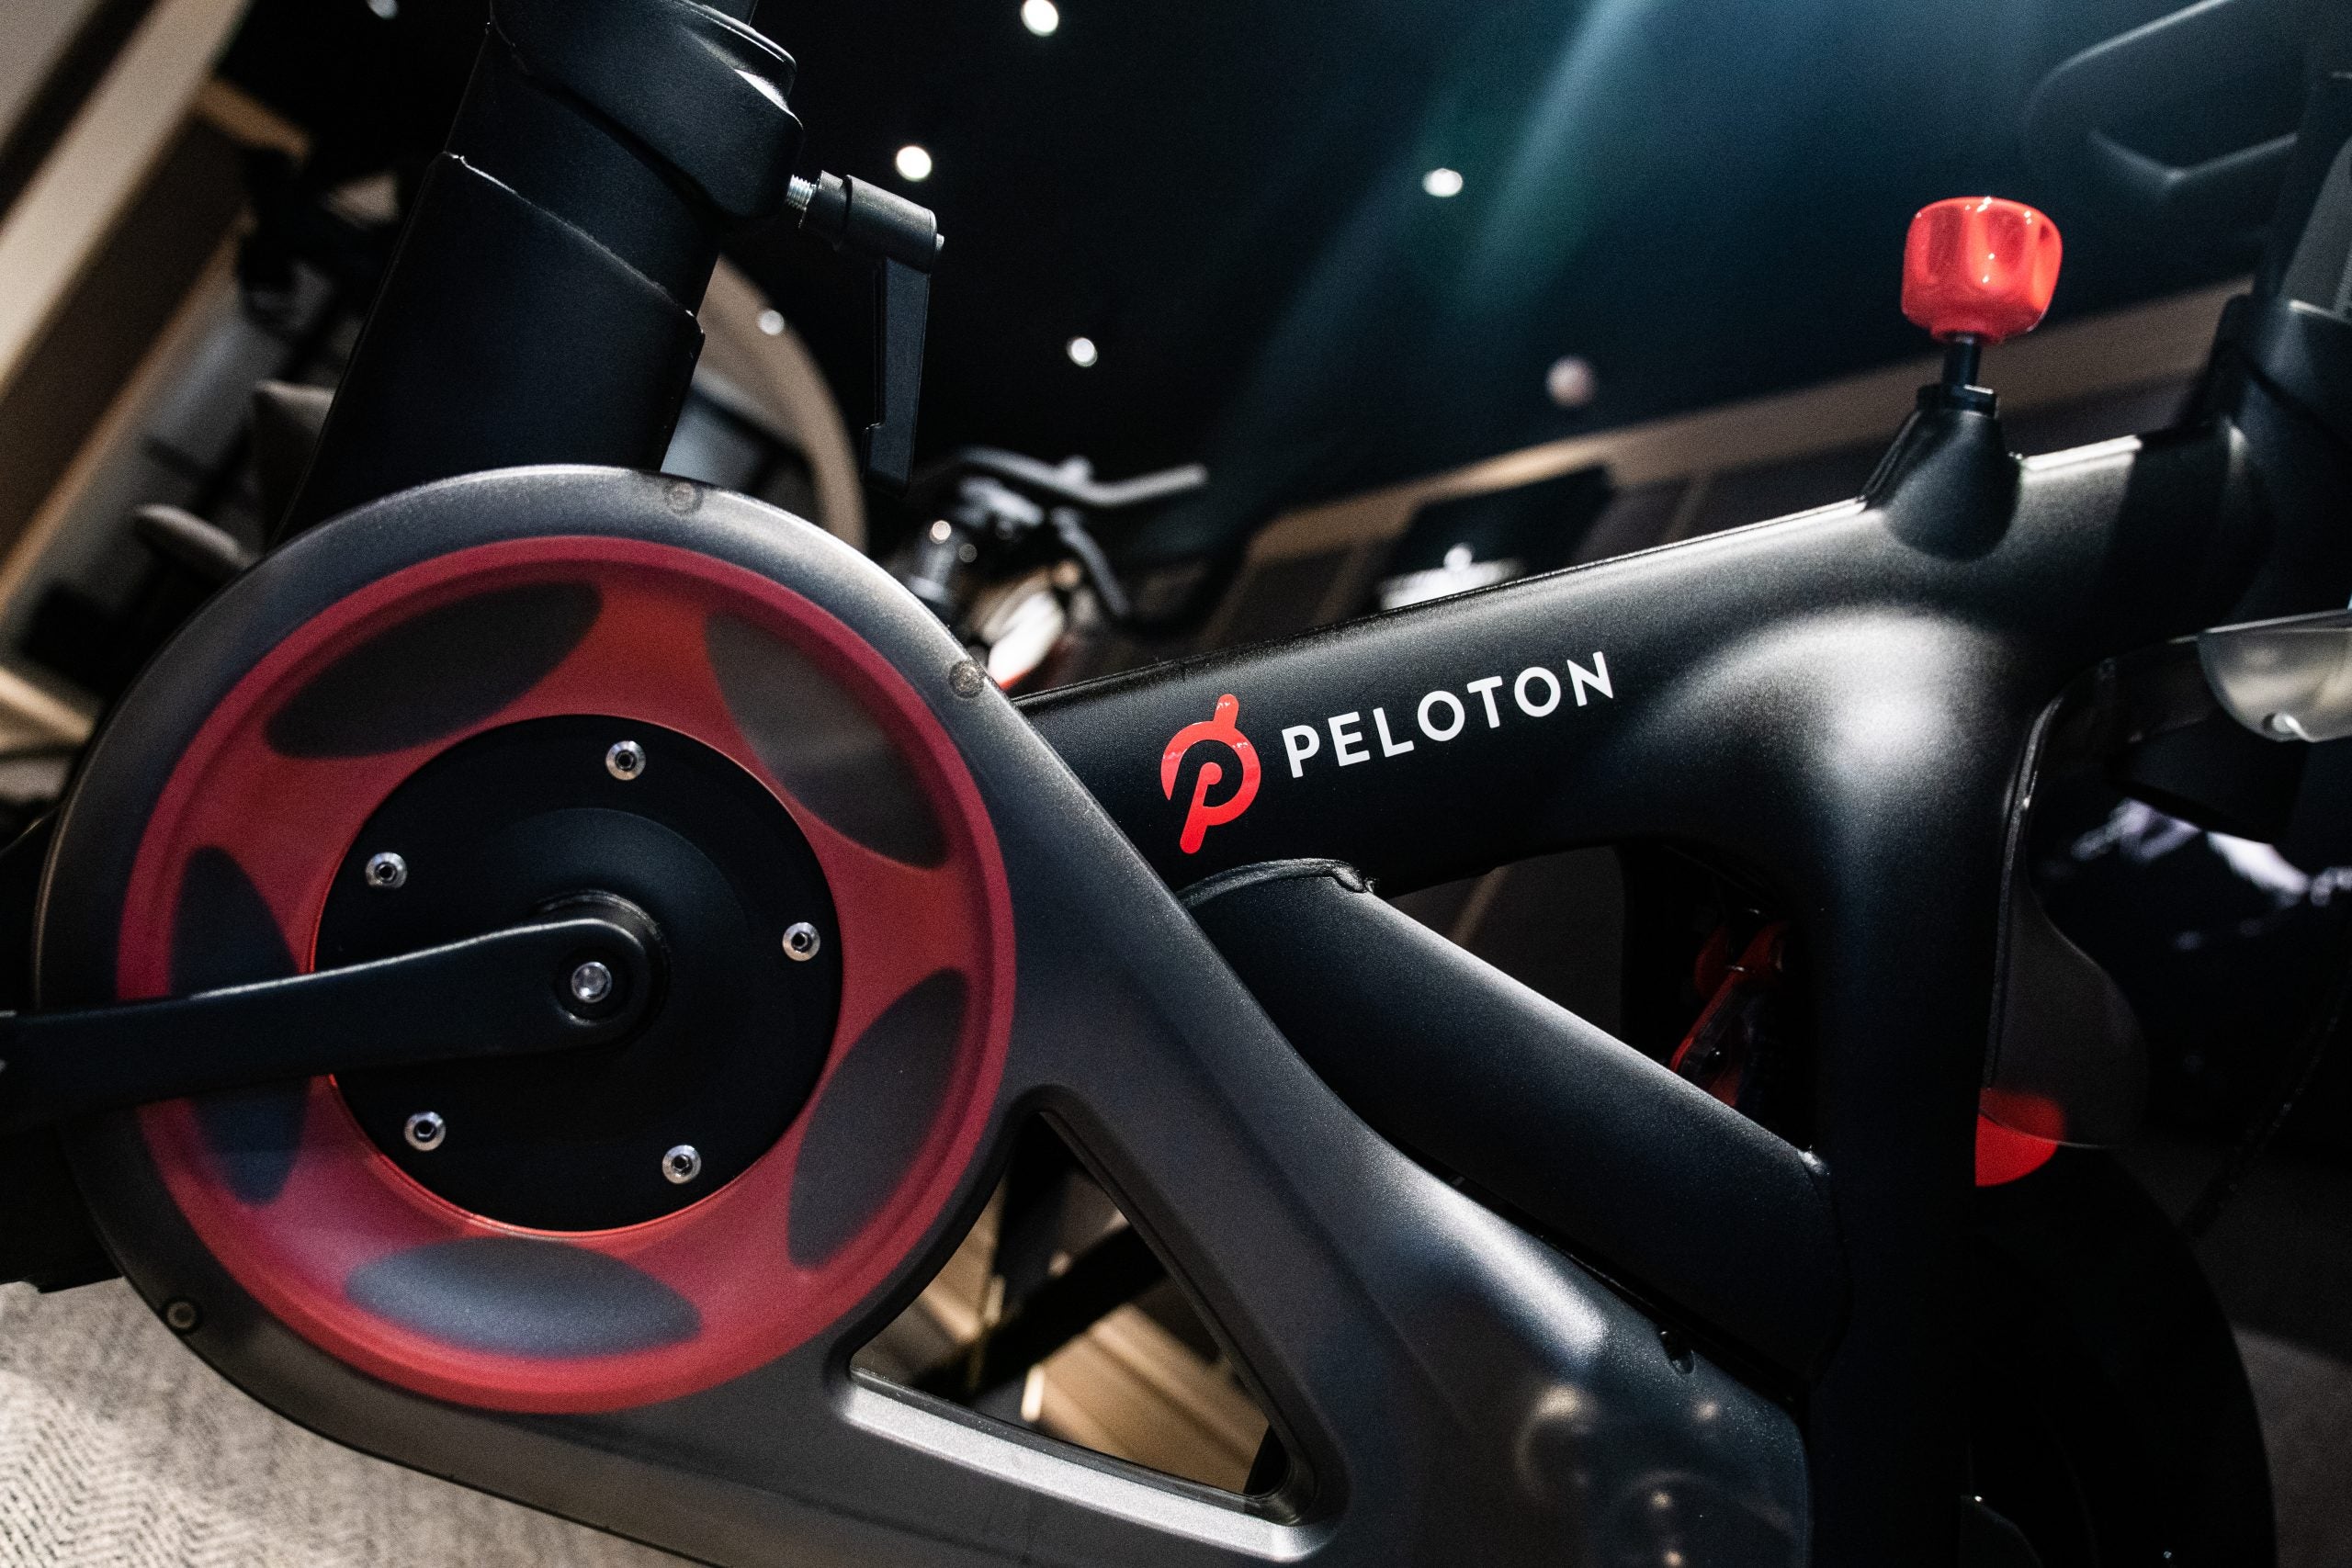 close-up of the bars and pedals on the lower part of a Peloton exercise bike